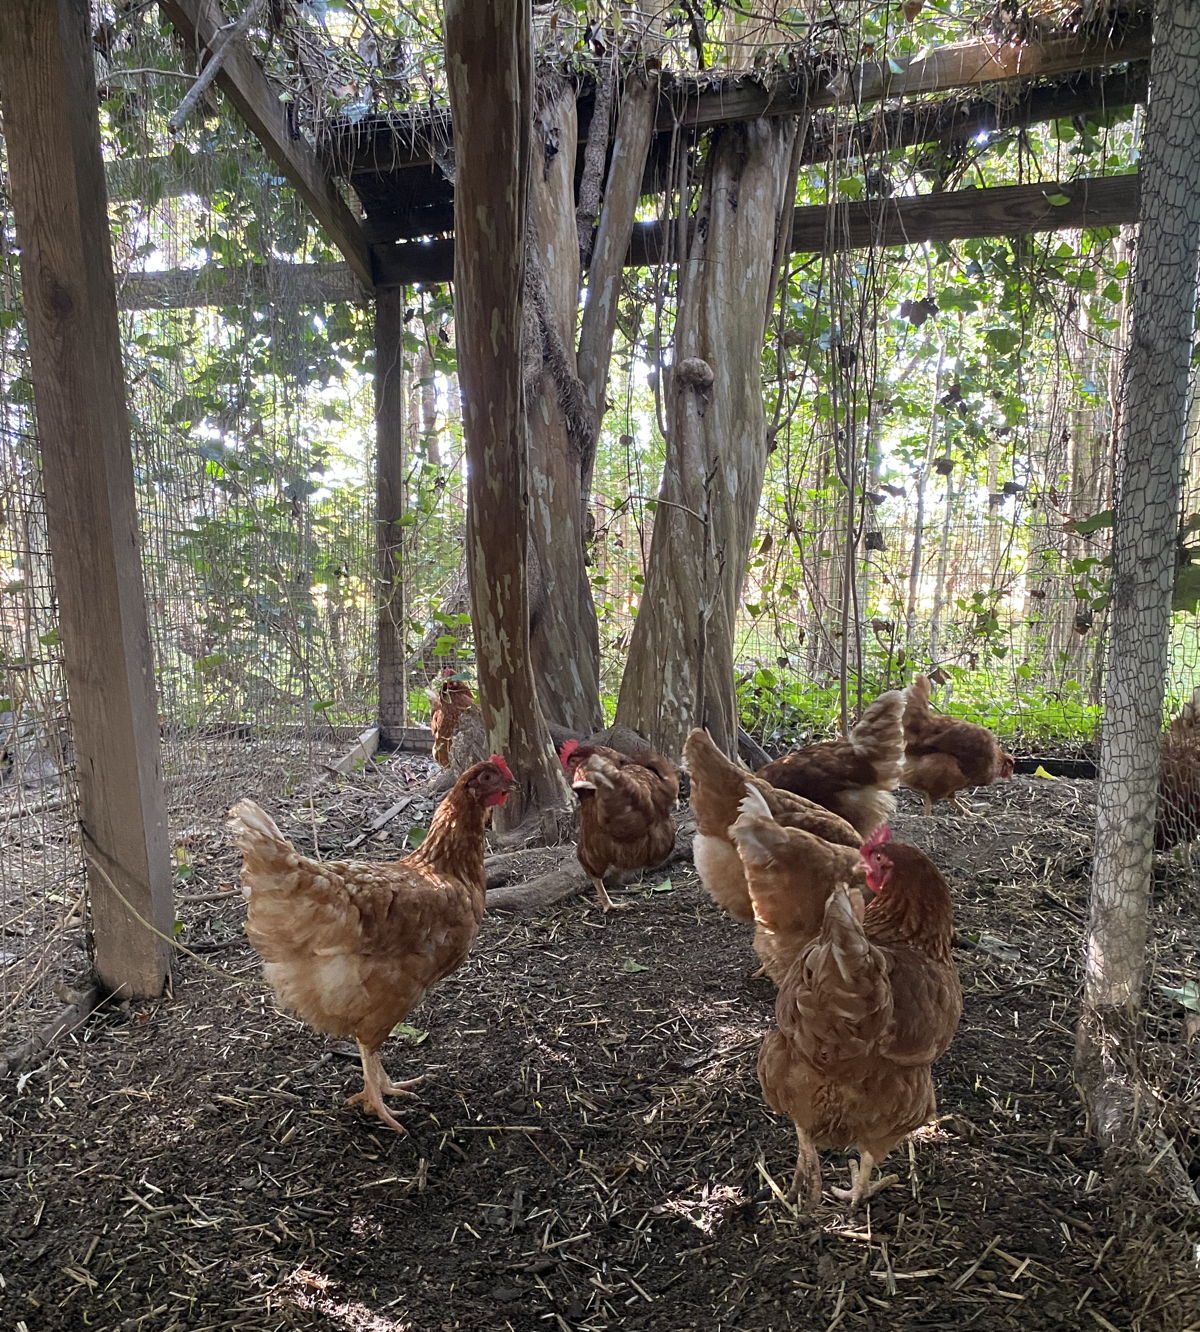 hens exploring their new home